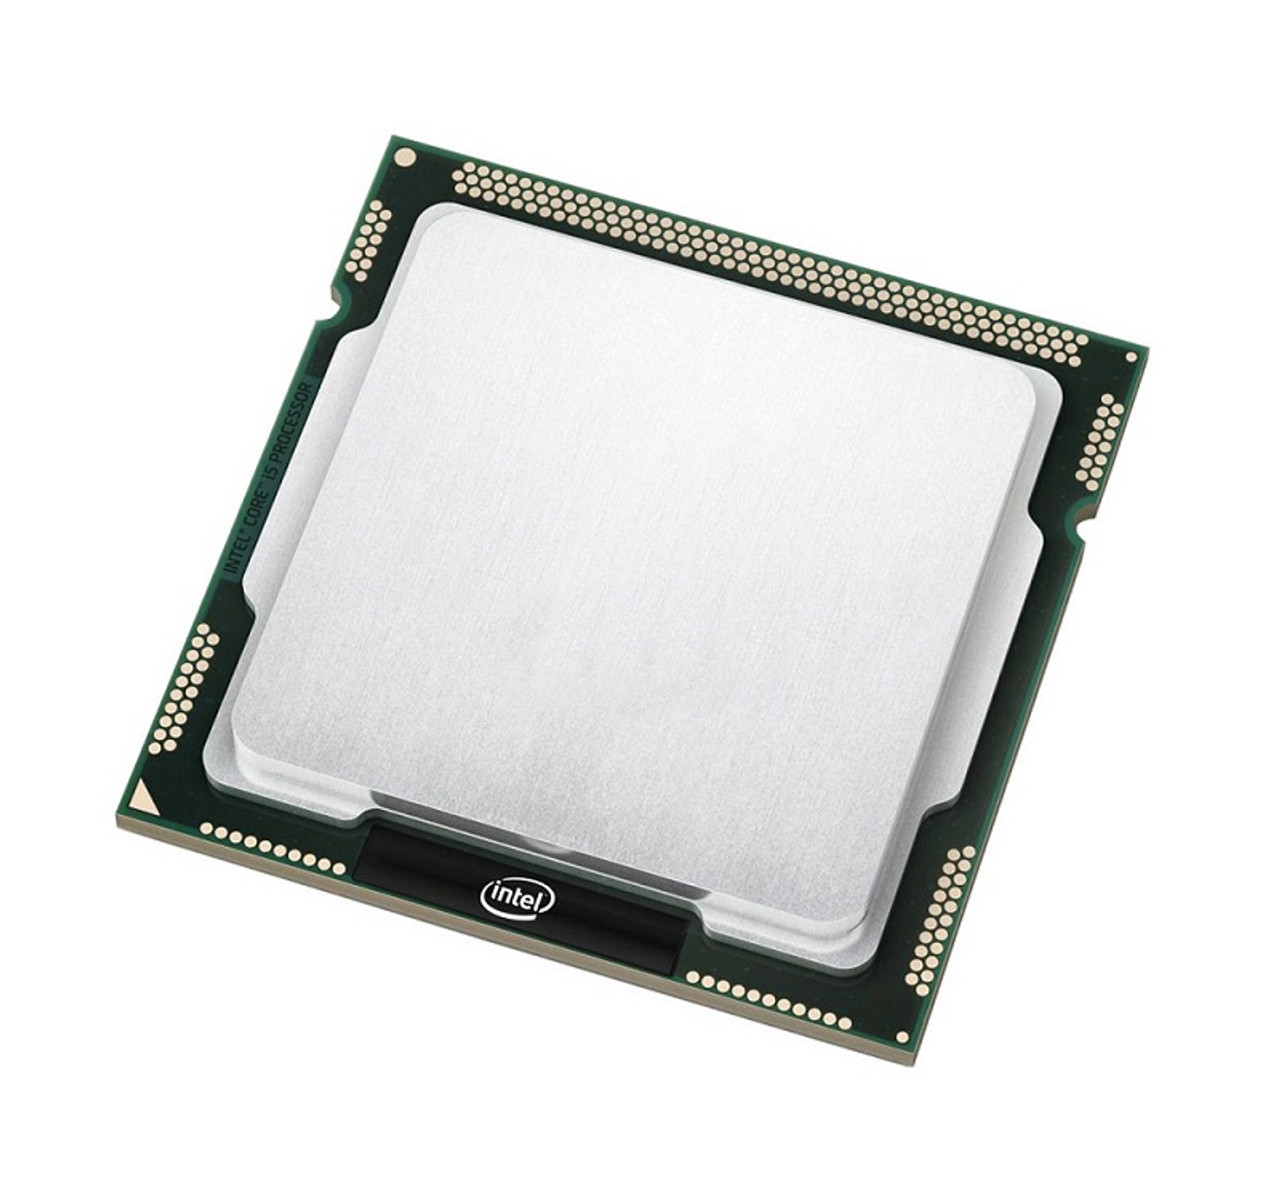 390249-001 - HP 2.2GHz 1000MHz FSB 2x1MB L2 Cache Socket 940 AMD Opteron Dual Core 875 Processor for ProLiant DL585 Server